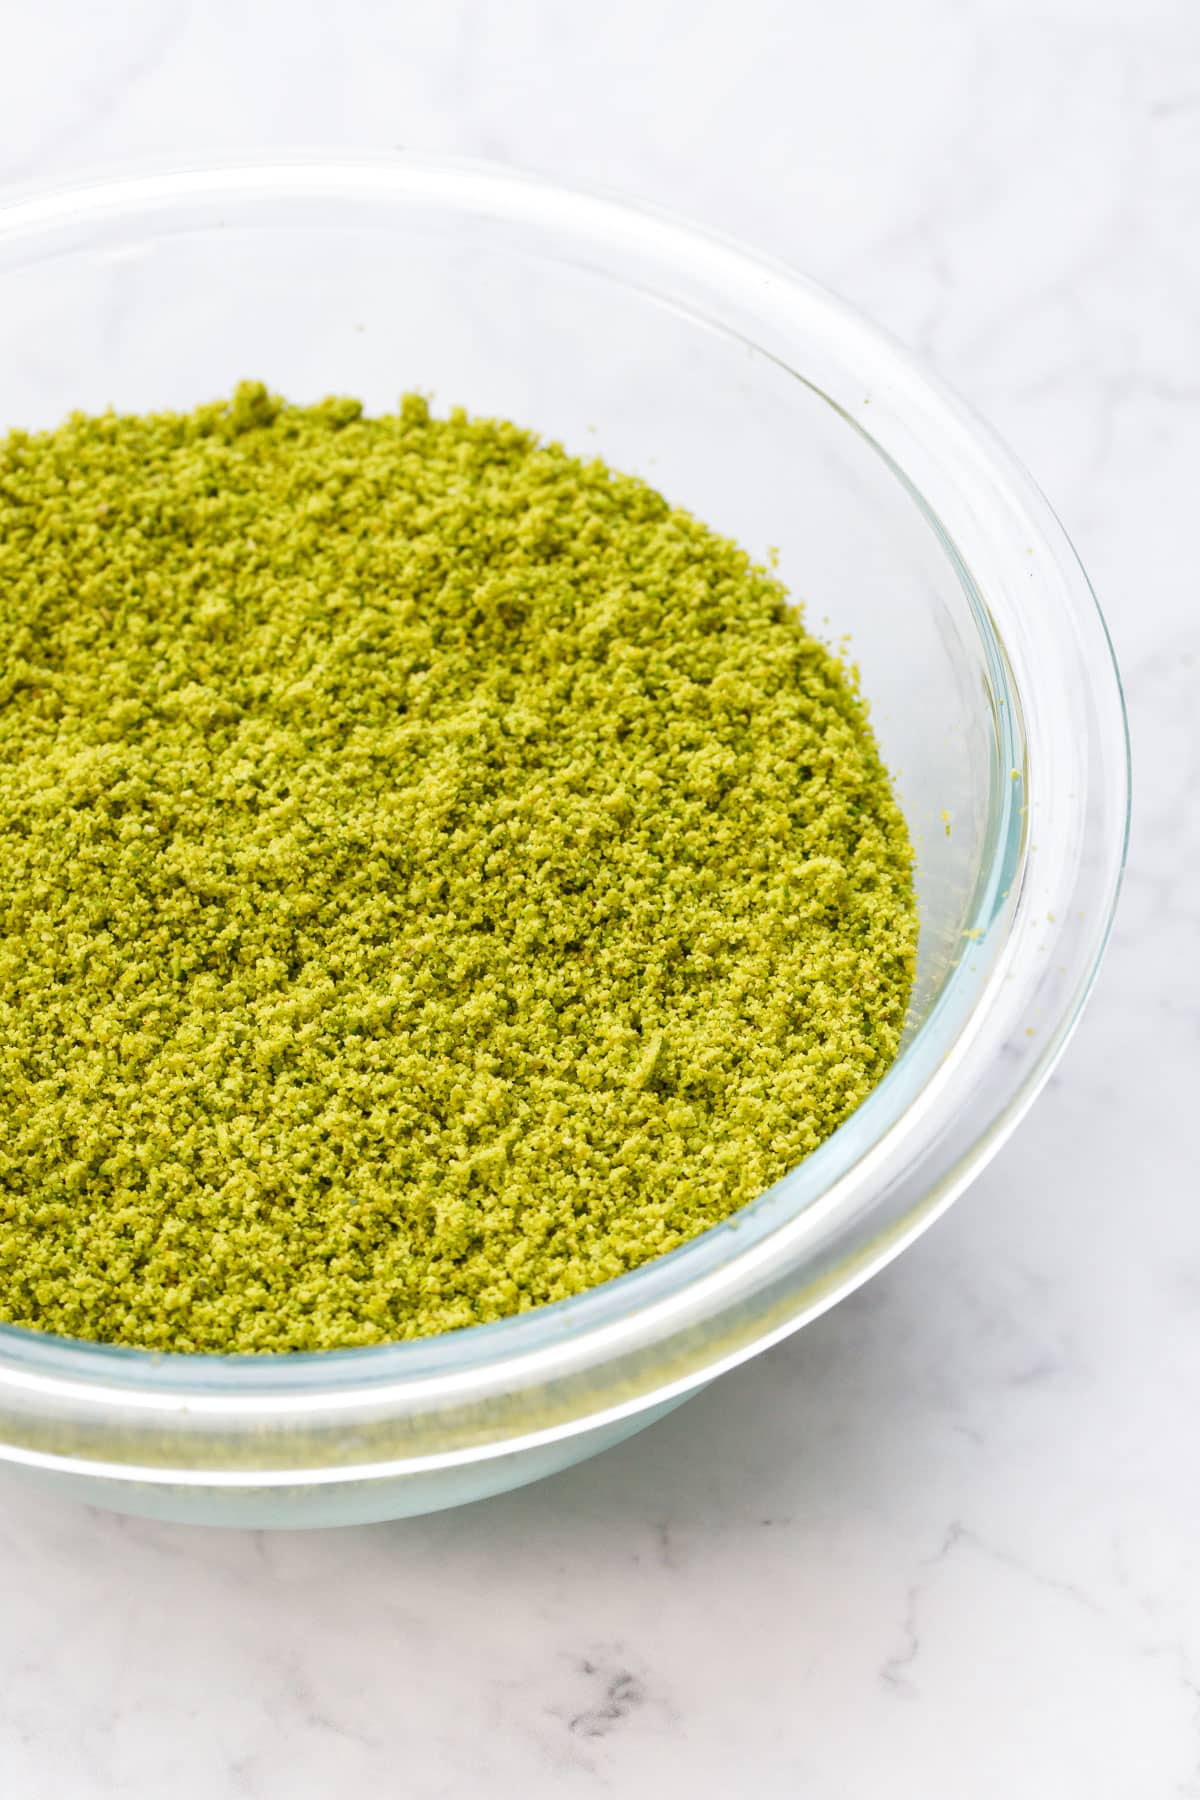 Bright green homemade pistachio flour in a glass mixing bowl on a marble background.